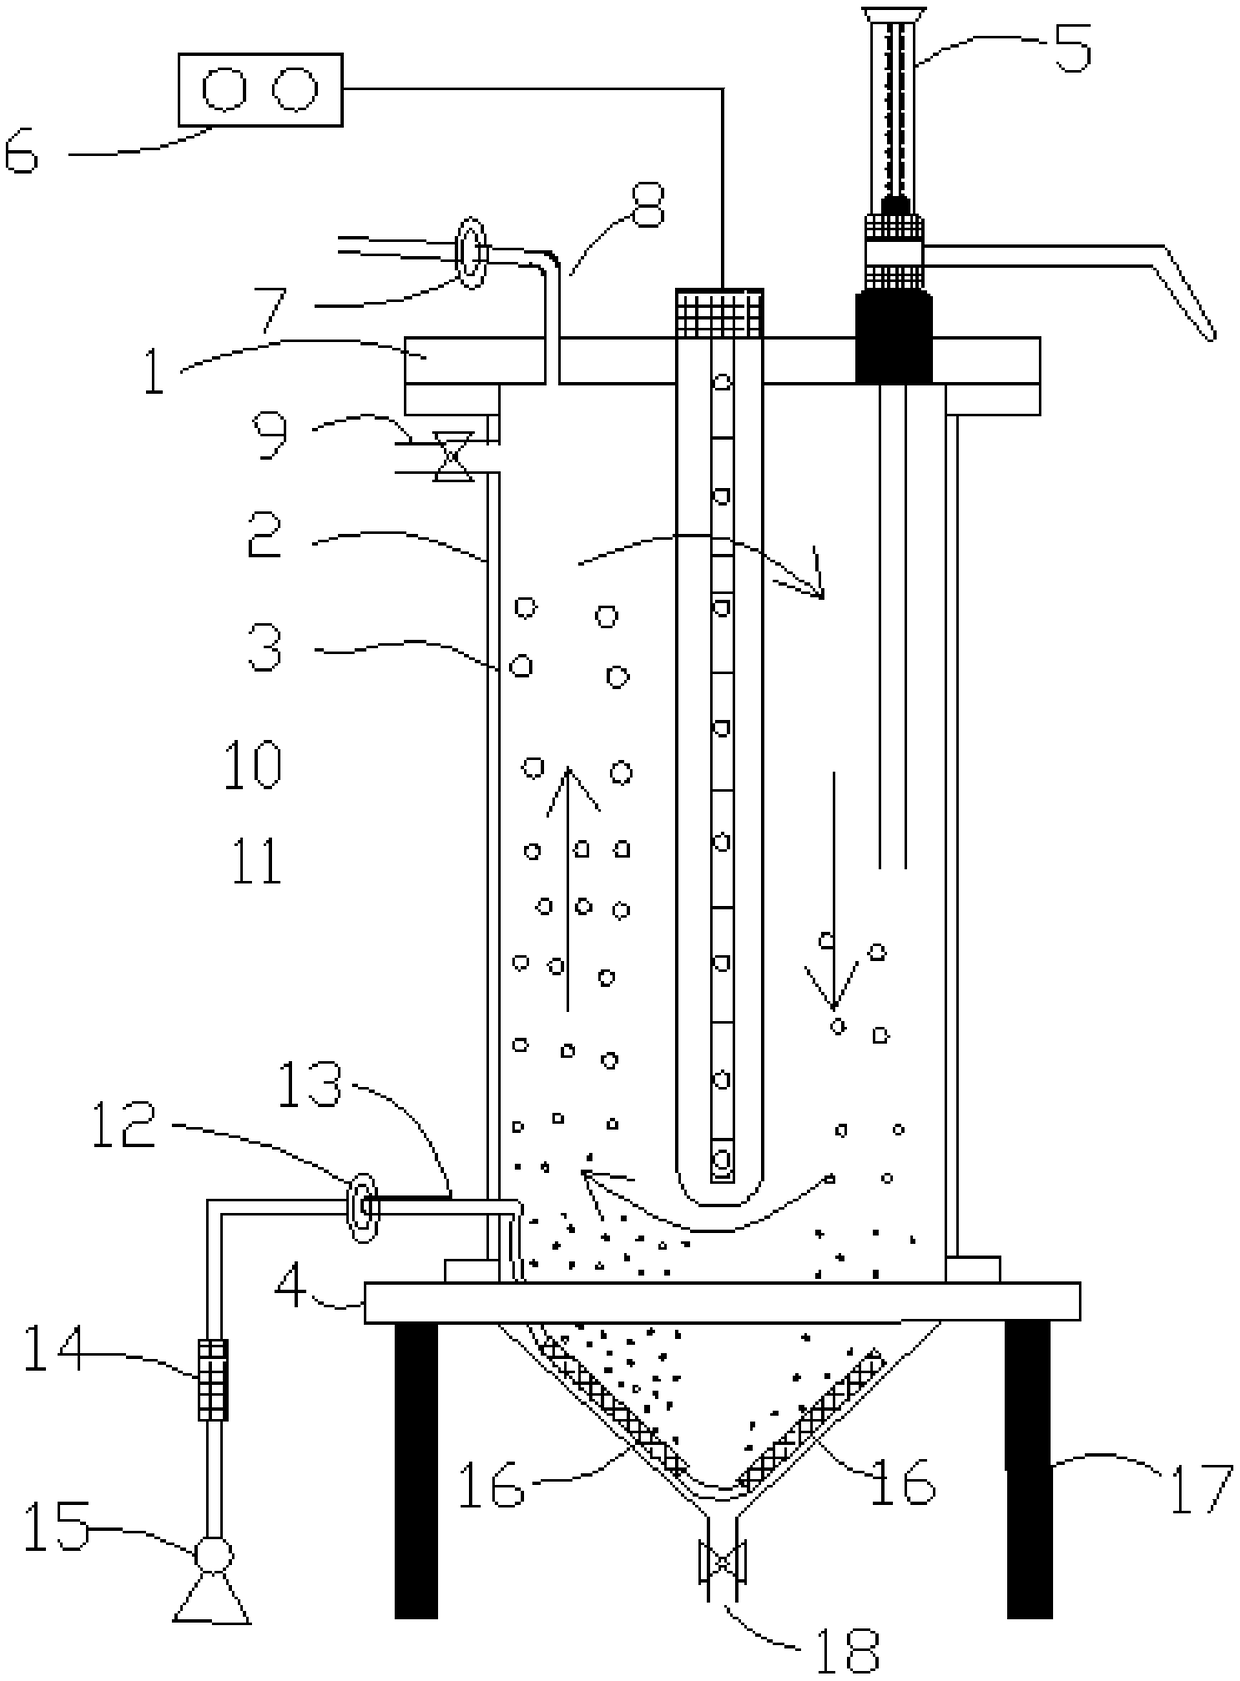 Microalgae sterile culture device and method suitable for mixotrophic culture